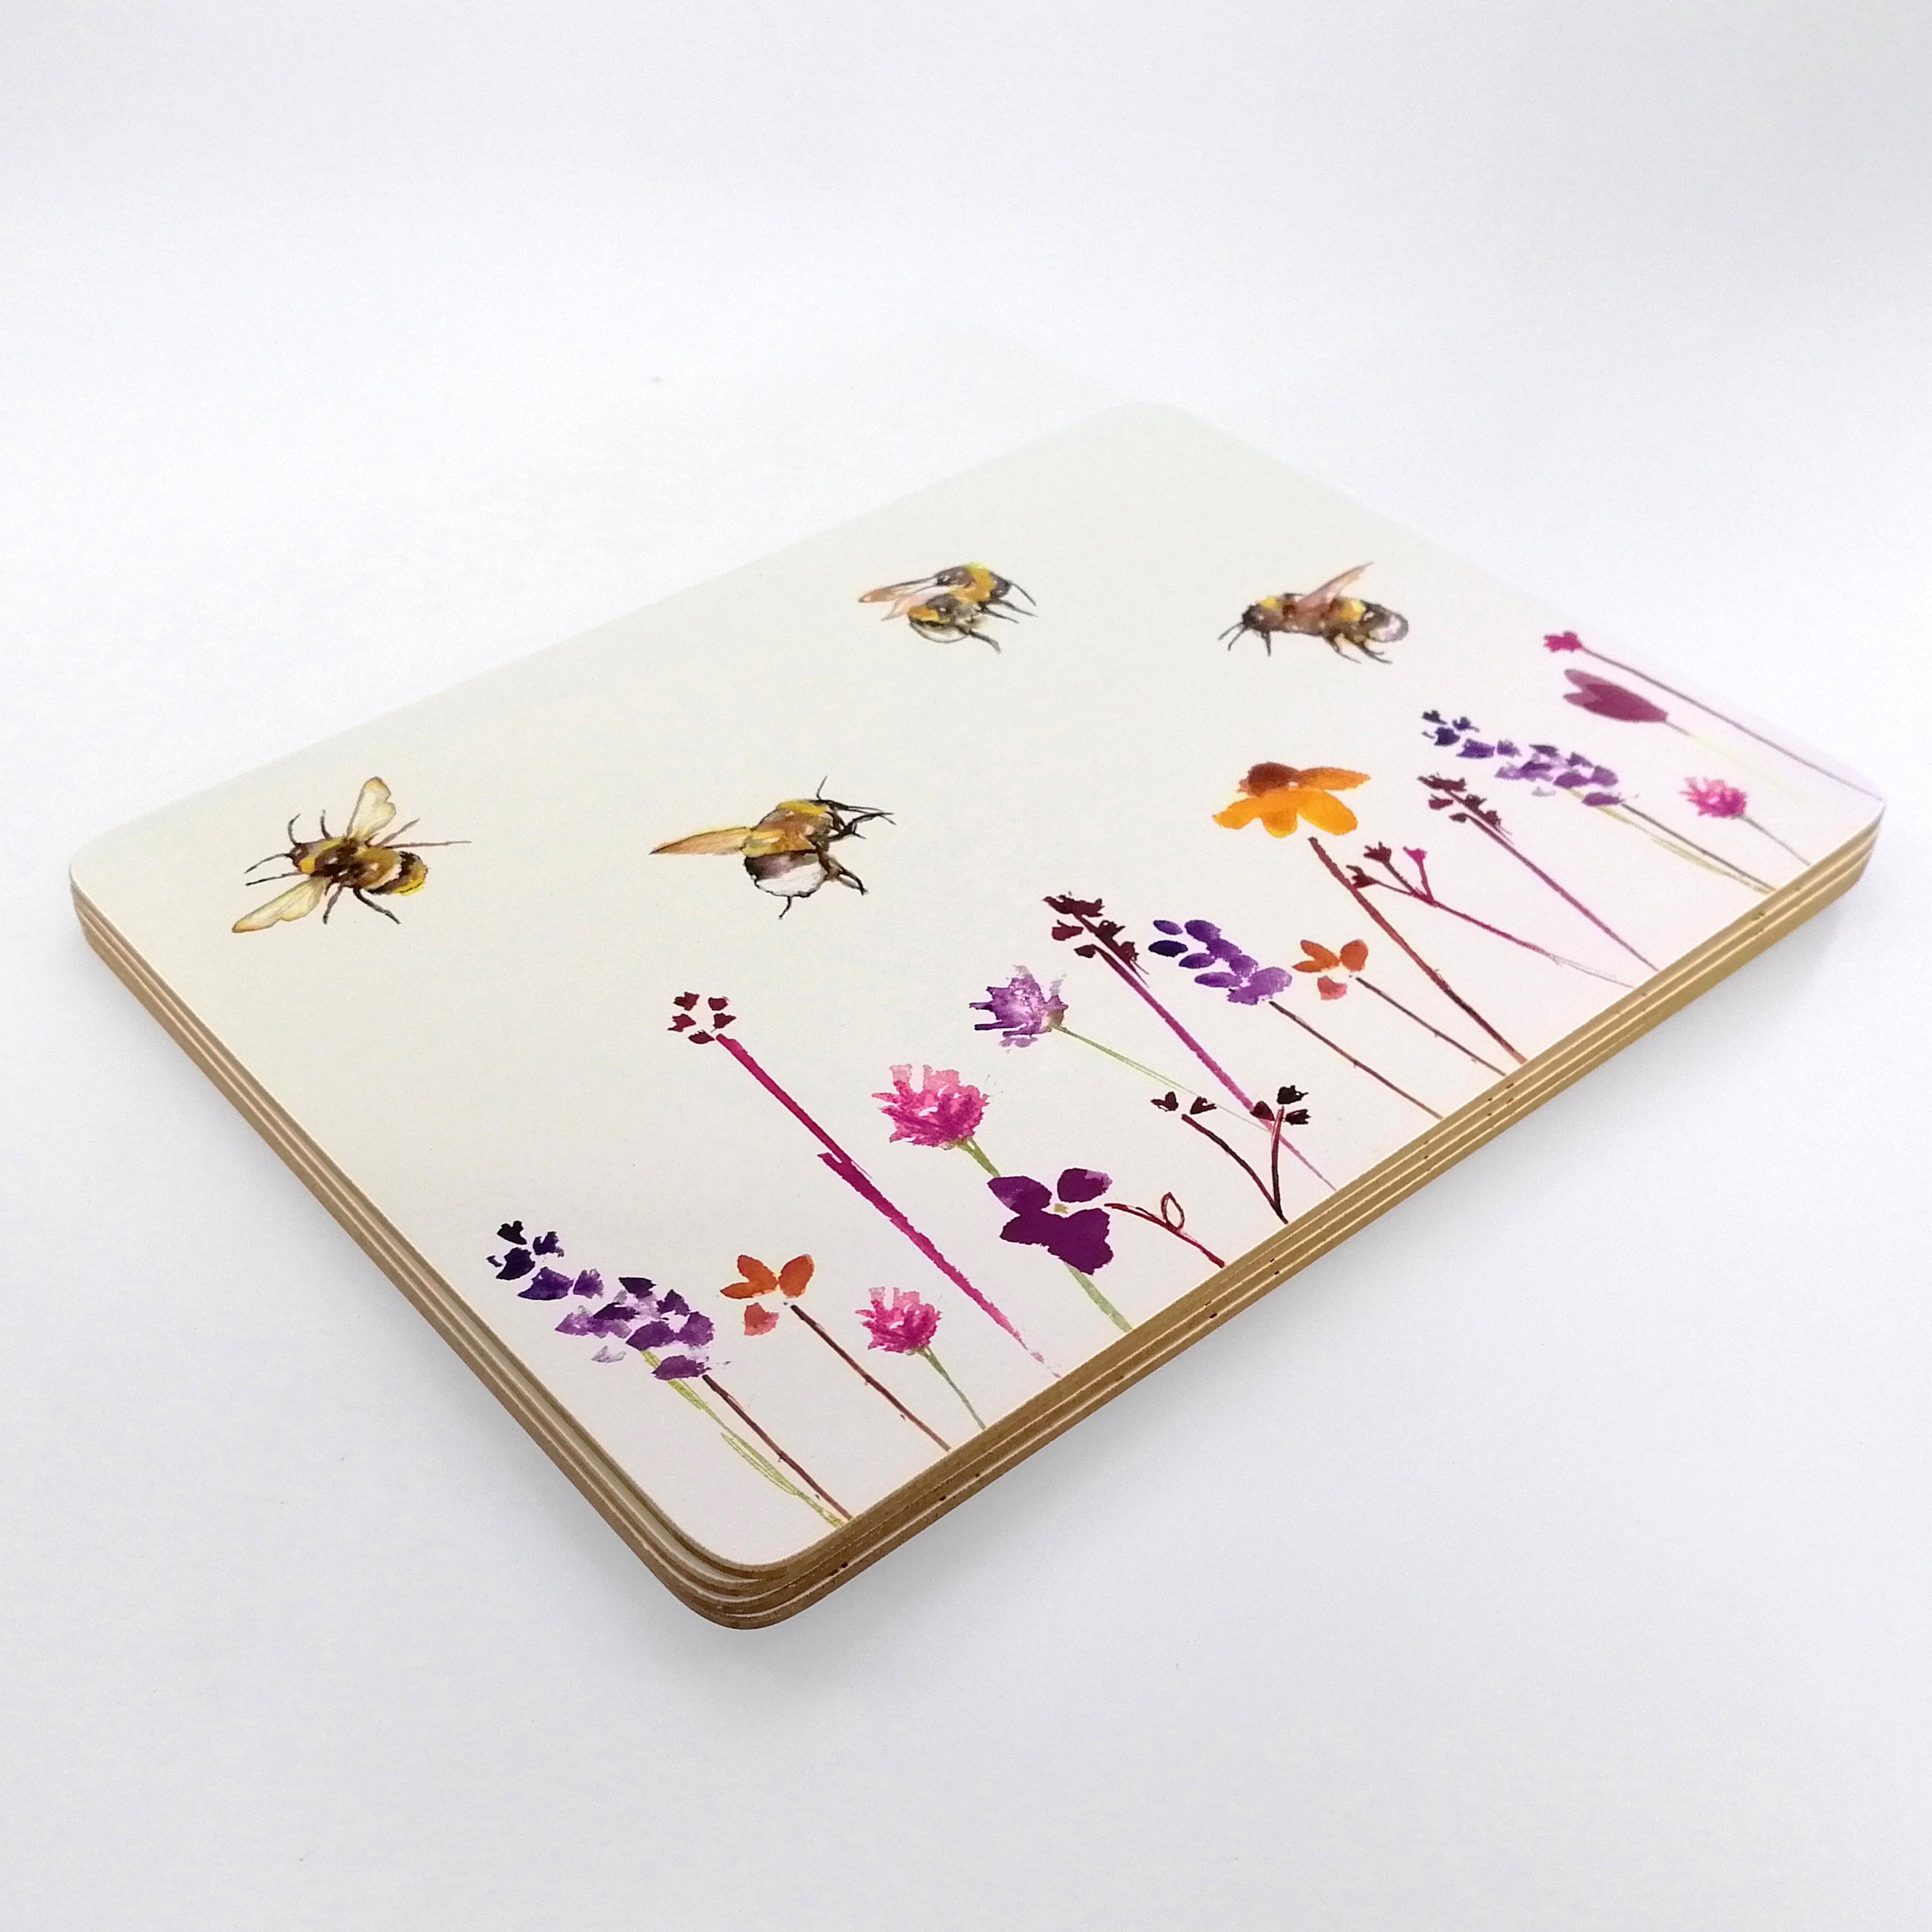 Busy Bees Placemats - Set of 4